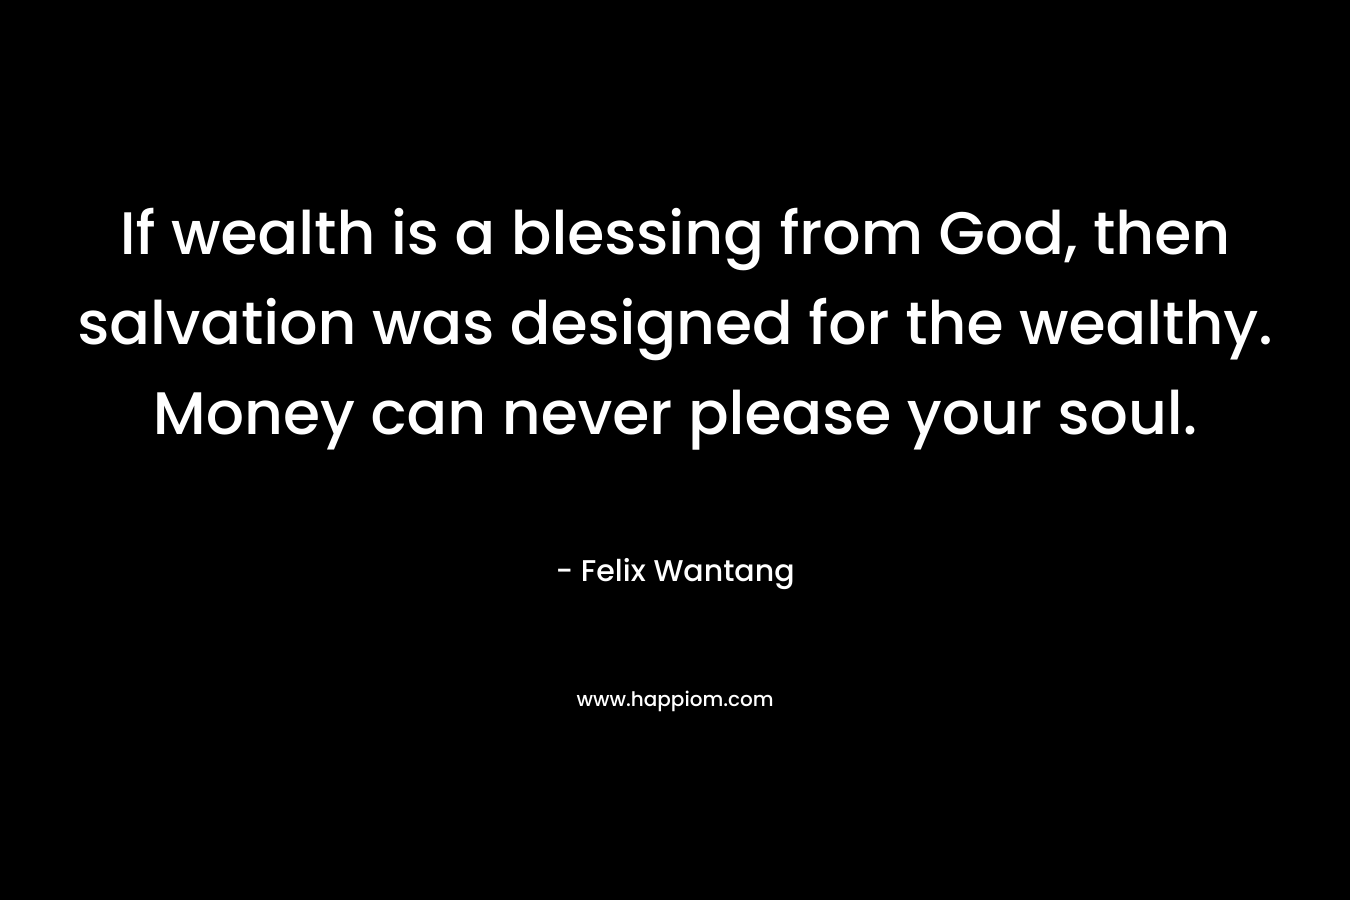 If wealth is a blessing from God, then salvation was designed for the wealthy. Money can never please your soul.